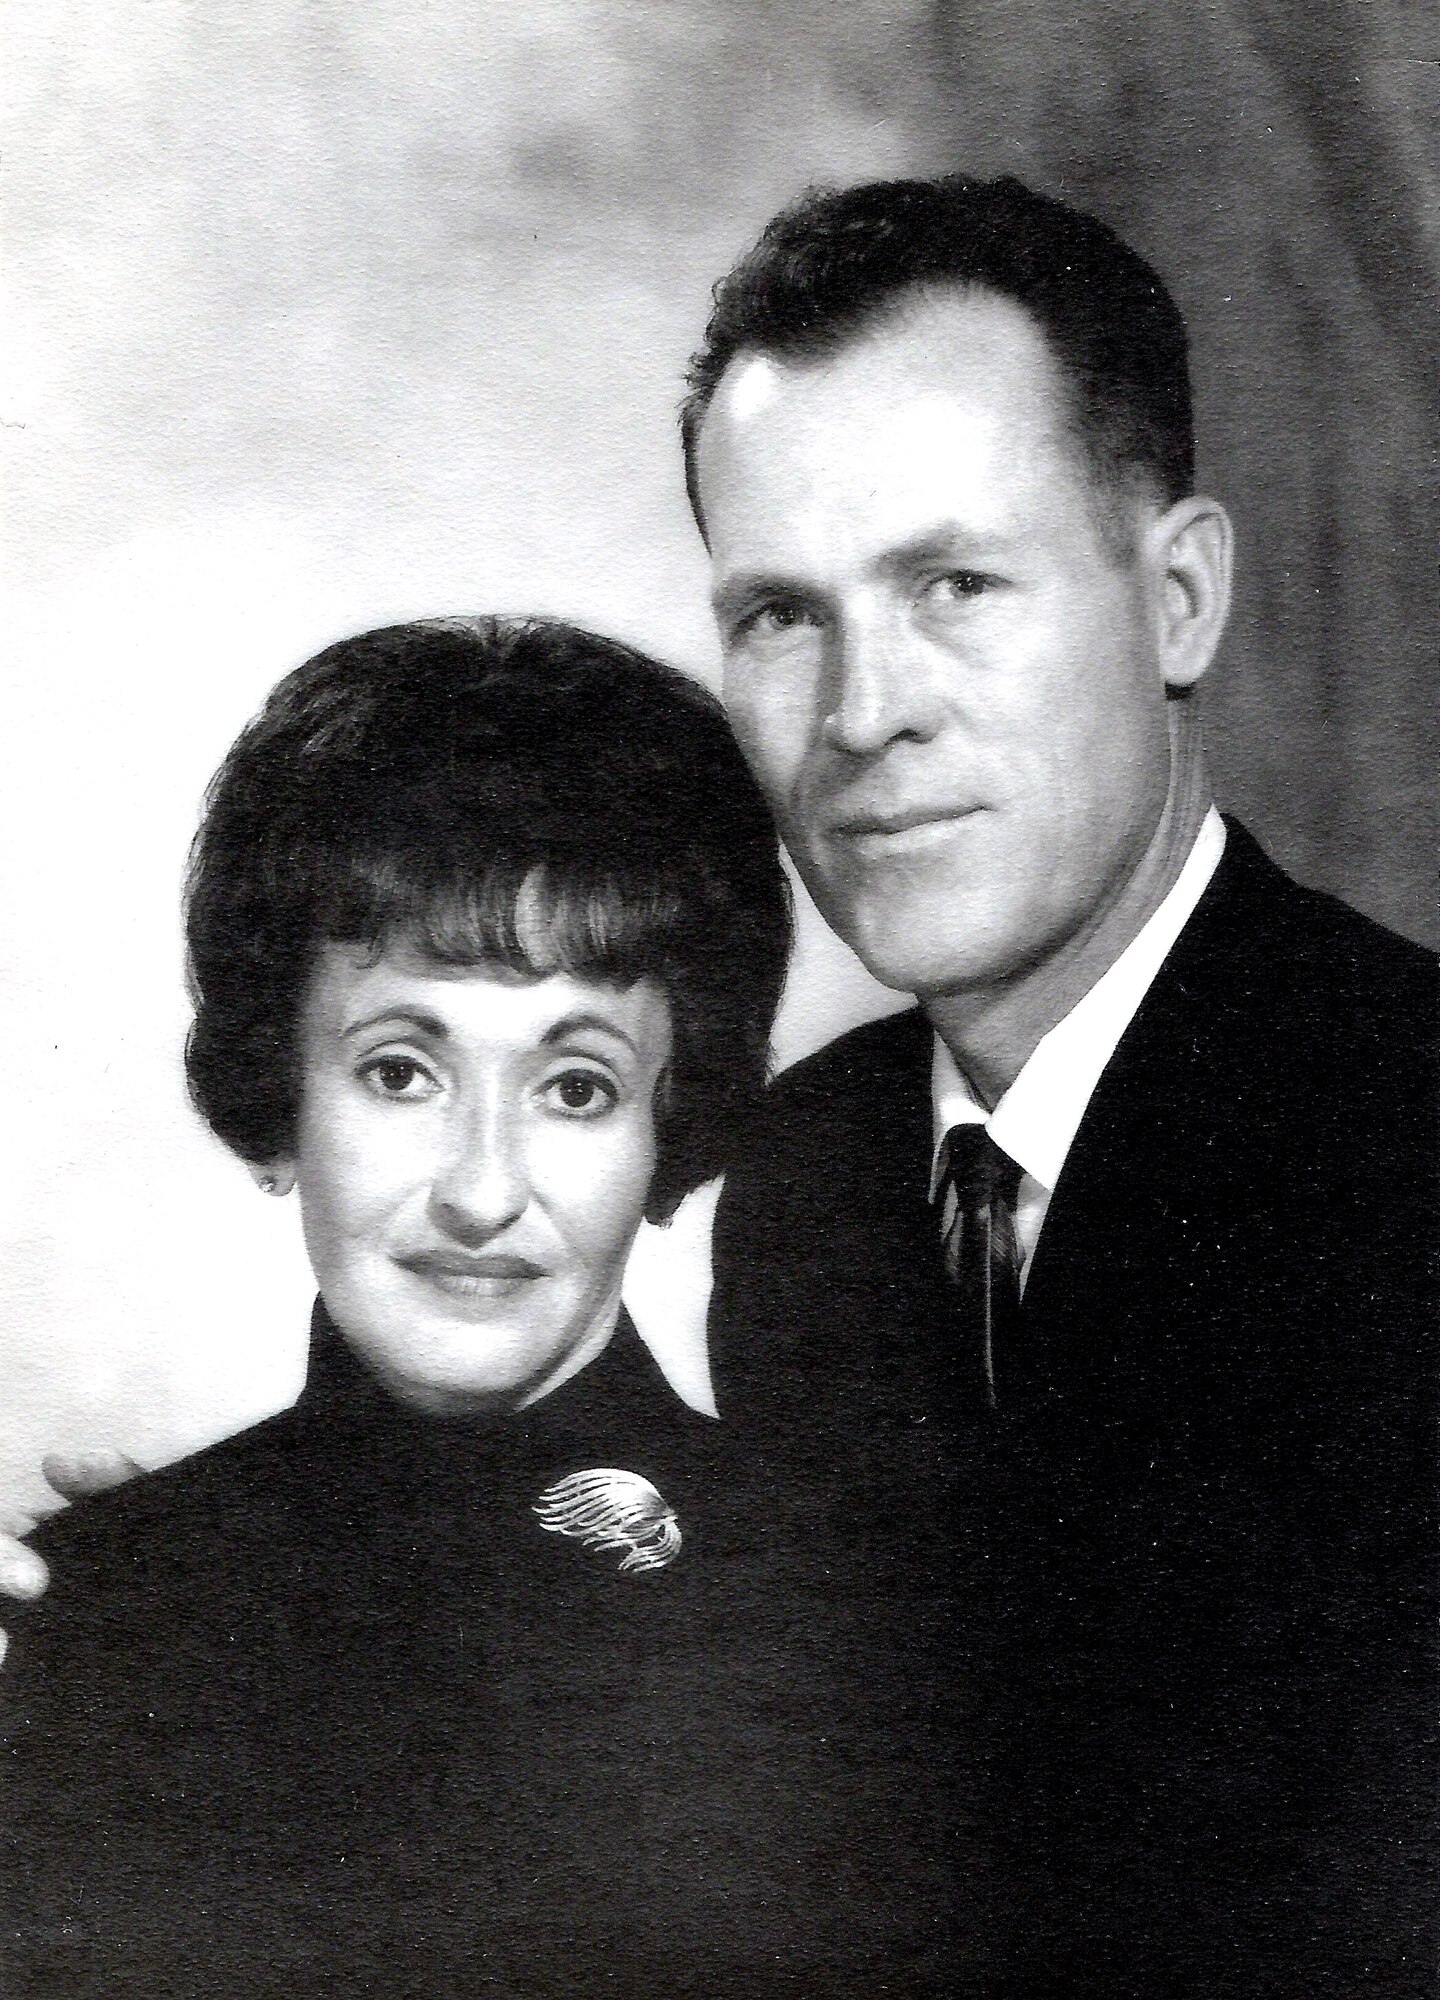 This portrait of Mary and Maj. Robert F. Woods was taken just months before Major Woods left for Vietnam in 1967. On Nov. 30, 2007, the Air Force announced that Major Woods, along with co-pilot Capt. Johnnie C. Cornelius, were identified and their remains returned to the United States from Vietnam.  On June 26, 1968, Major Woods and Captain Cornelius were flying a visual reconaissance mission over Quang Binh Province, Vietnam, when their O-2A Skymaster aircraft crashed in a remote mountainous area.  Major Woods was buried with full military honors April 9, 2008, at Arlington National Cemetery nearly 40 years after he disappeared in the crash. (Photo courtesy of the Woods family)